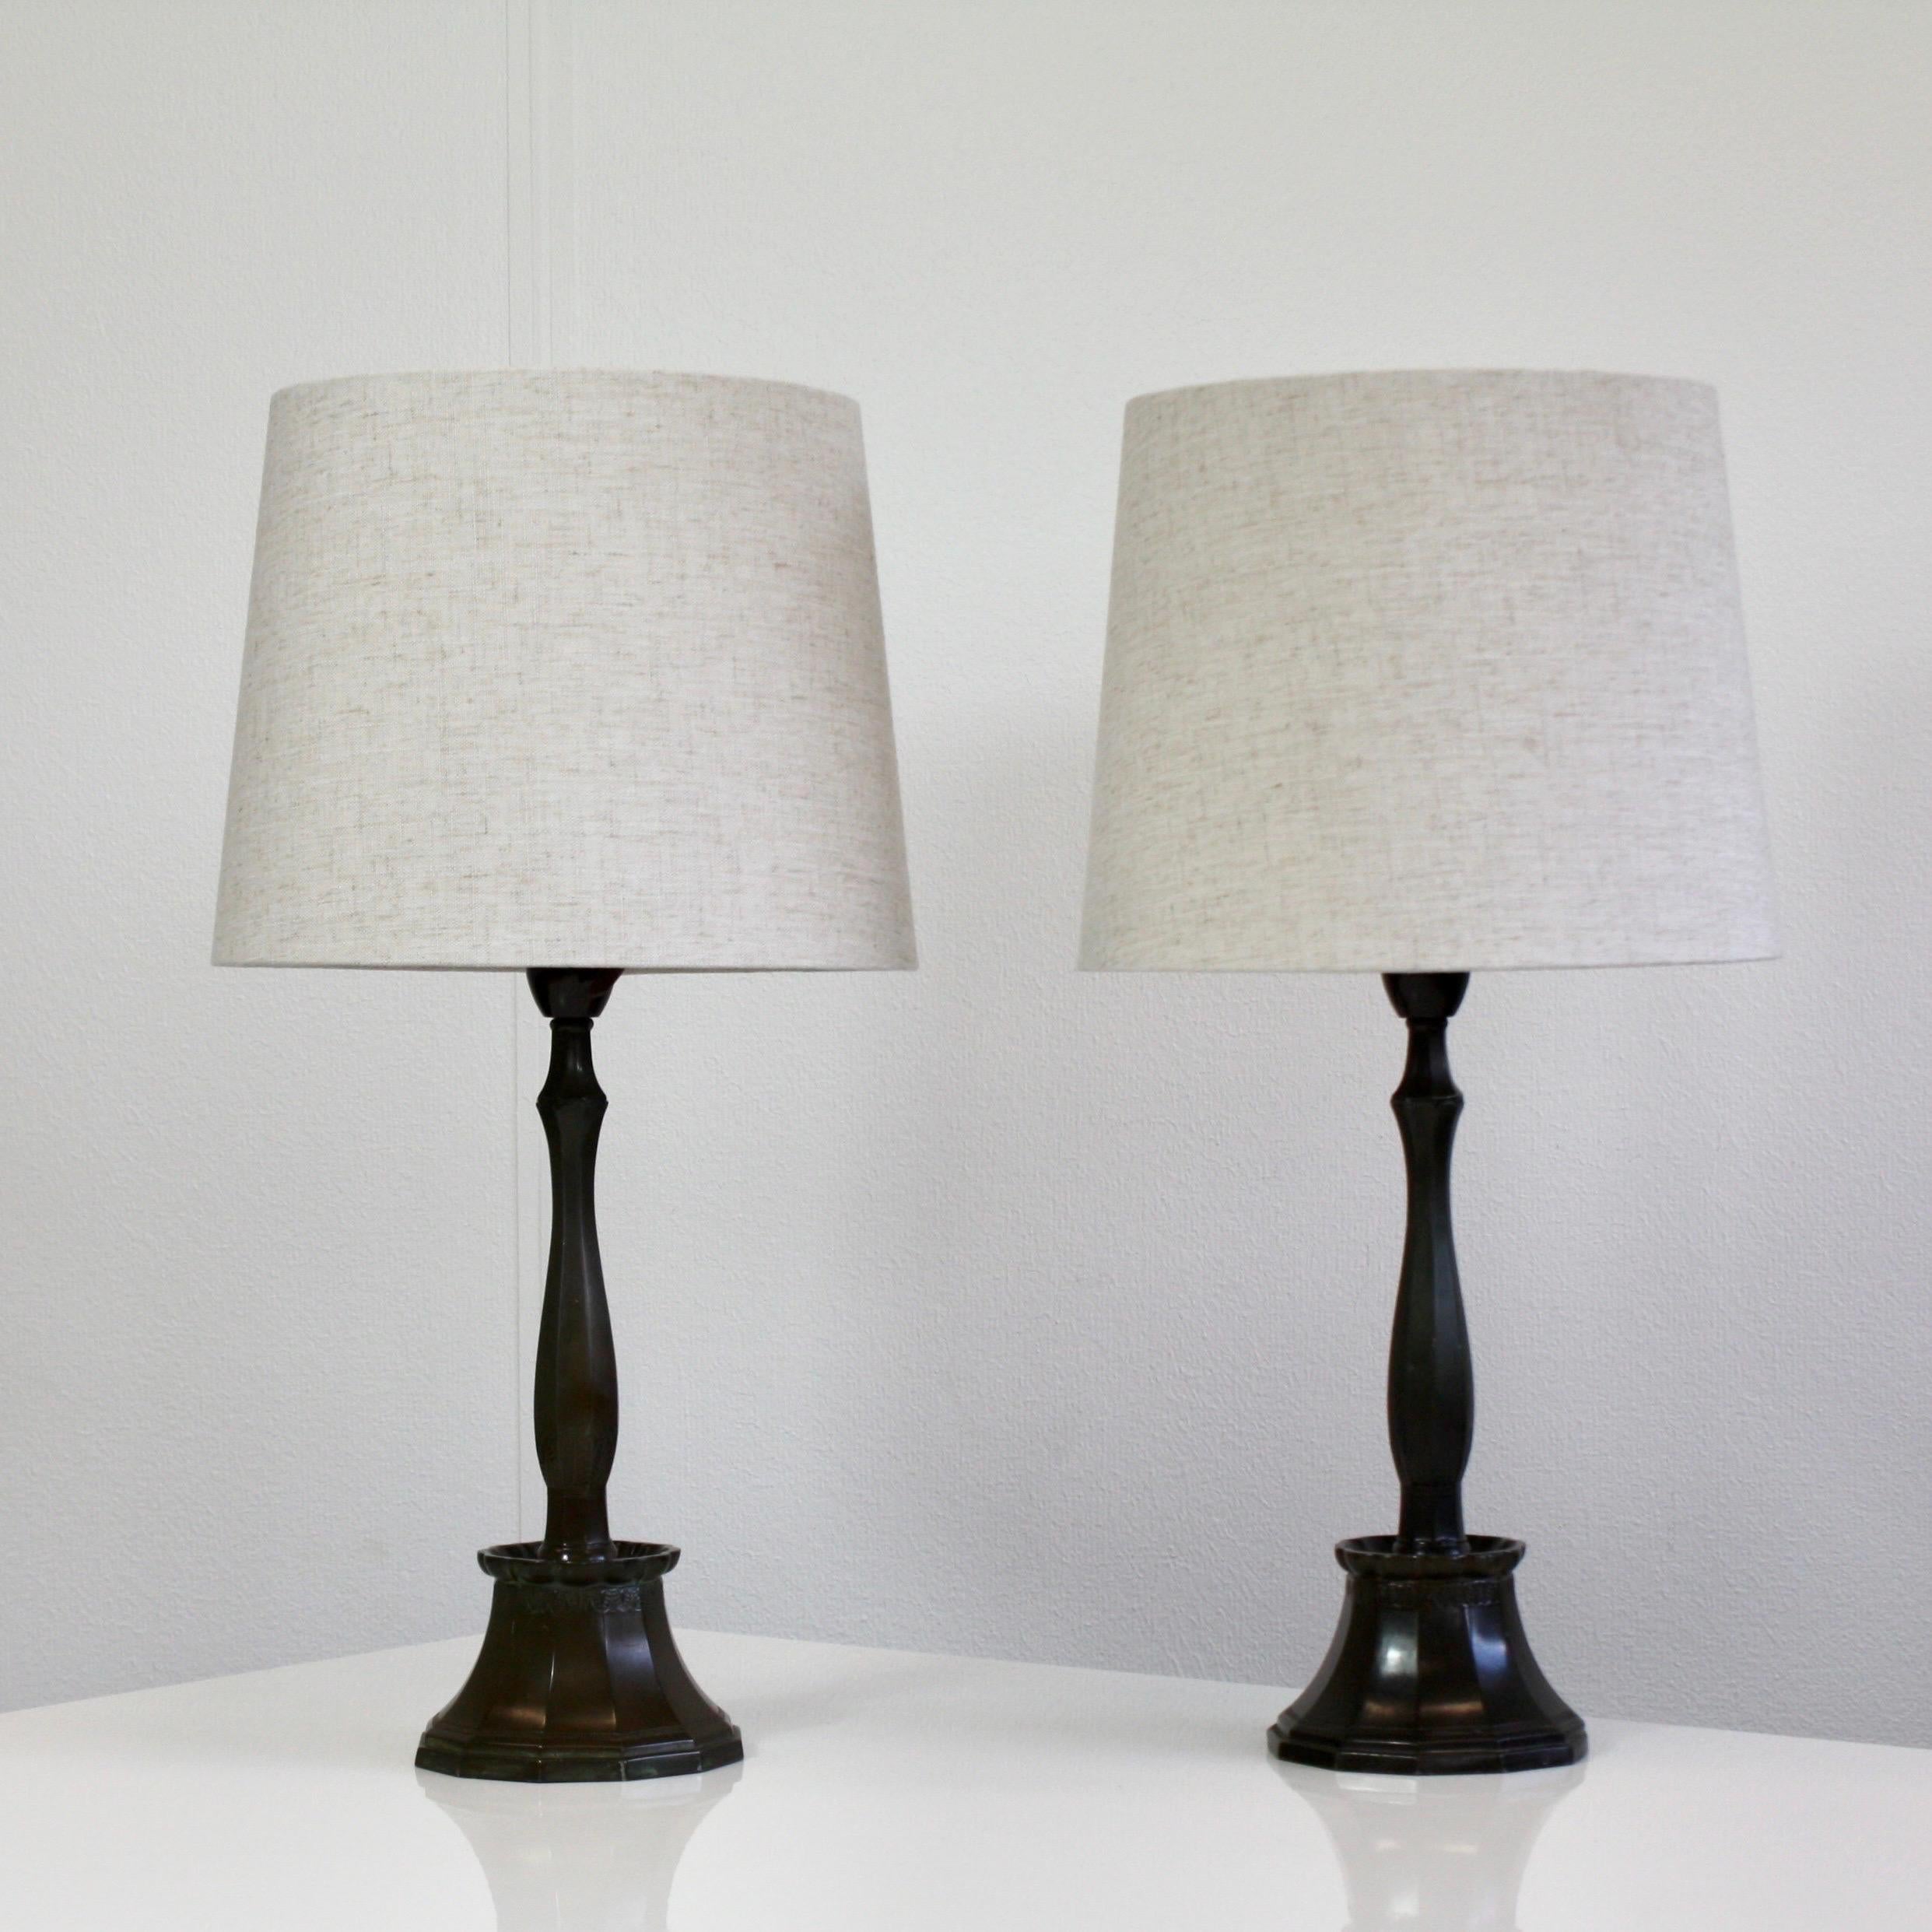 An exquisite set of Just Andersen table lamps. These lamps were created in 1926 and are part of Just Andersens early work and a true testament to his pioneerring in the Art Deco movement. 

* A pair (2) of metal lamps with 12-sided bases with